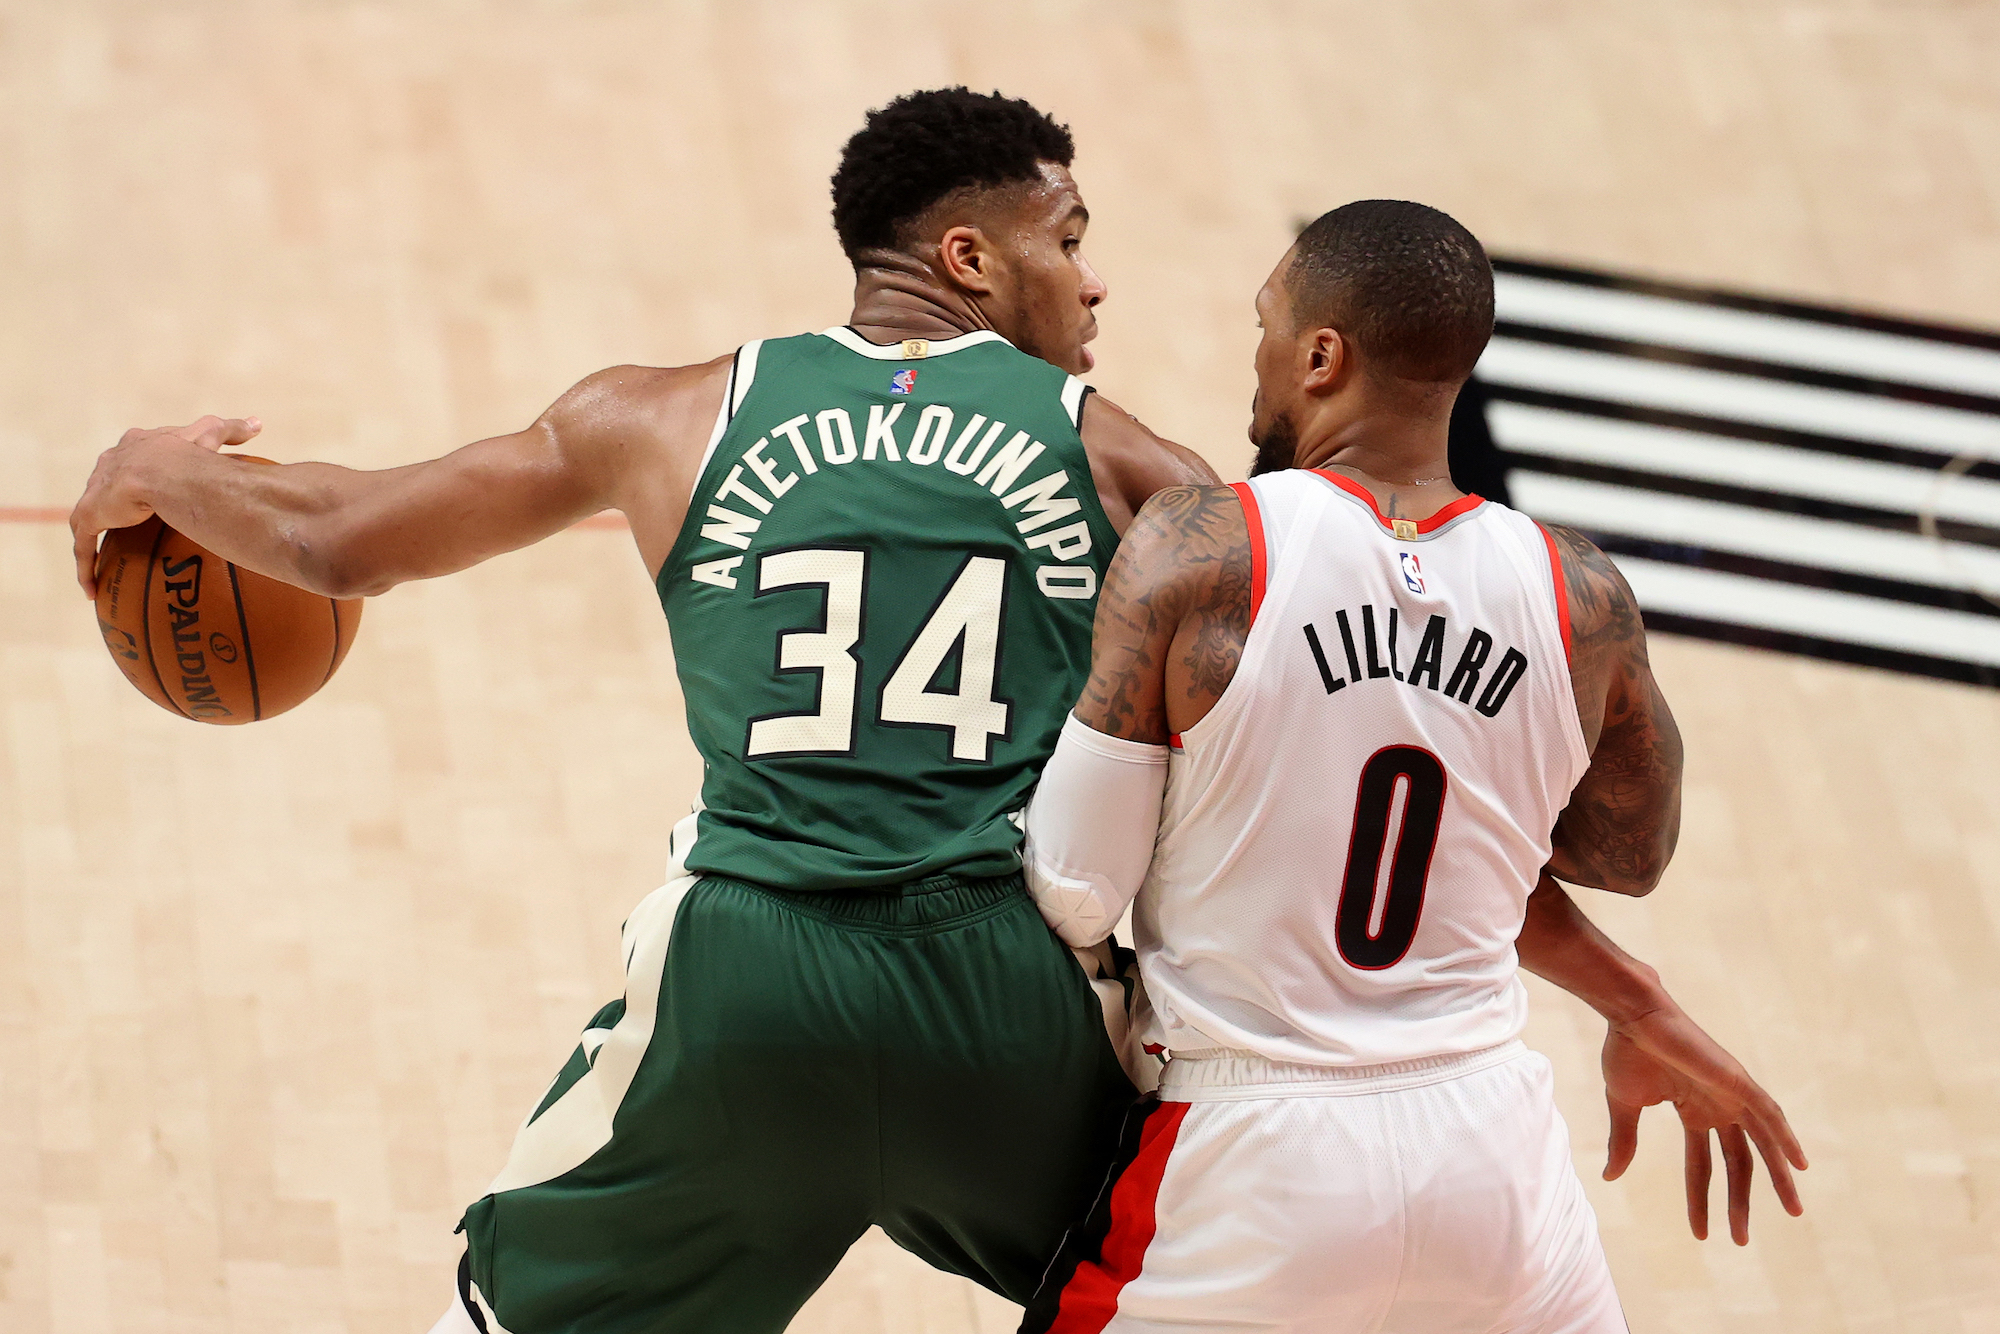 Giannis Antetokounmpo and Damian Lillard in a game between the Bucks and Blazers